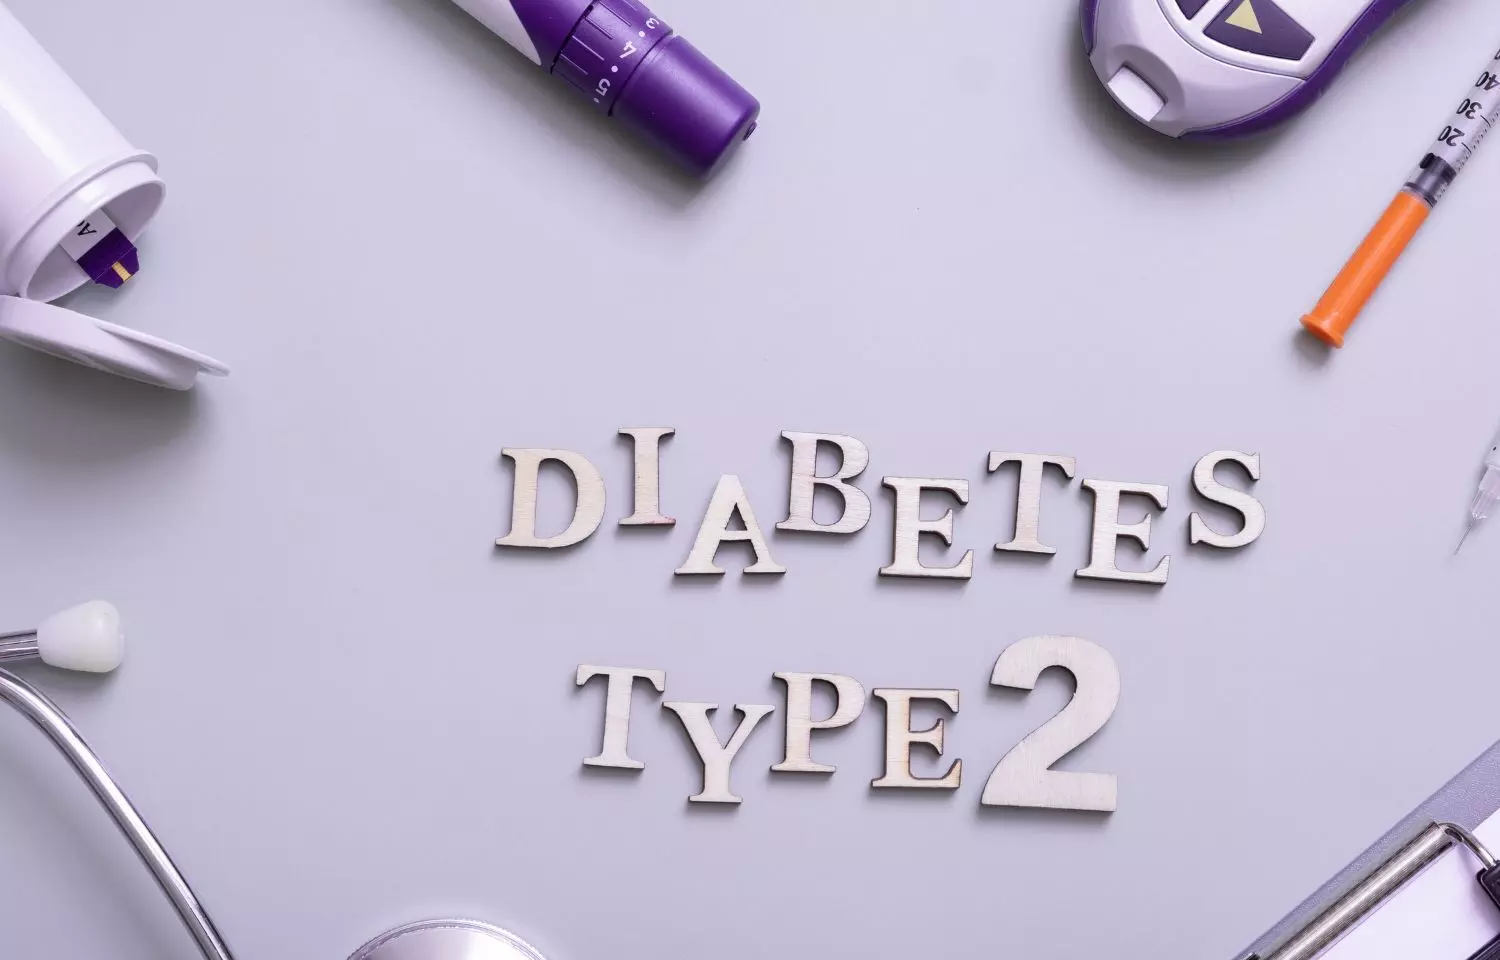 Early onset type 2 diabetes patients prone to substantially higher relative risk of CVD and death